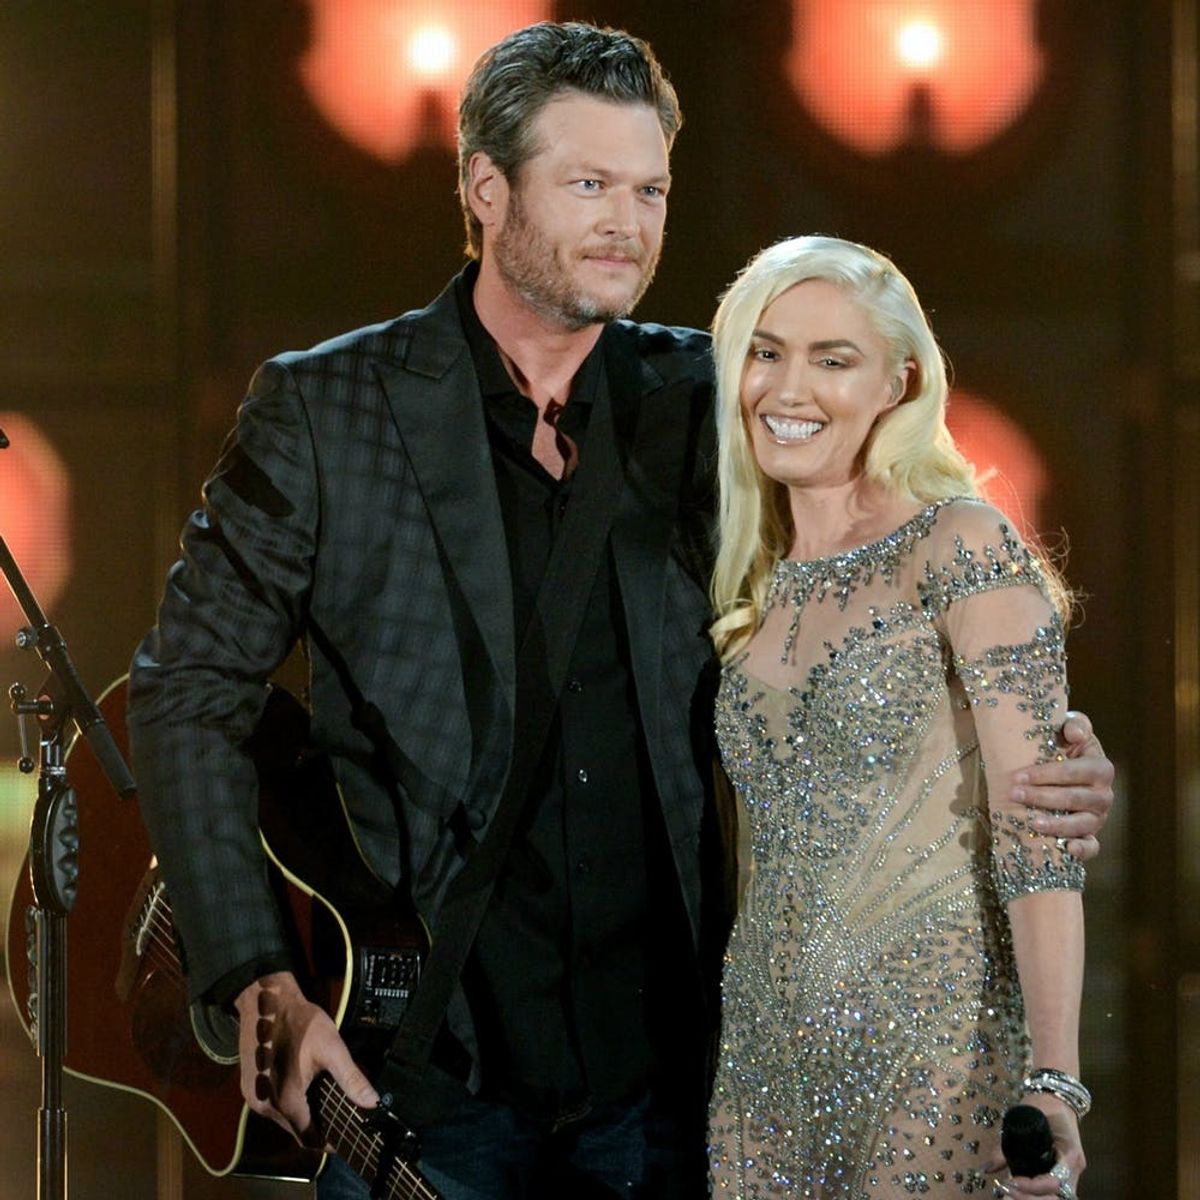 You Have to See the Adorable Message Gwen Stefani Sent to Blake Shelton for His Birthday